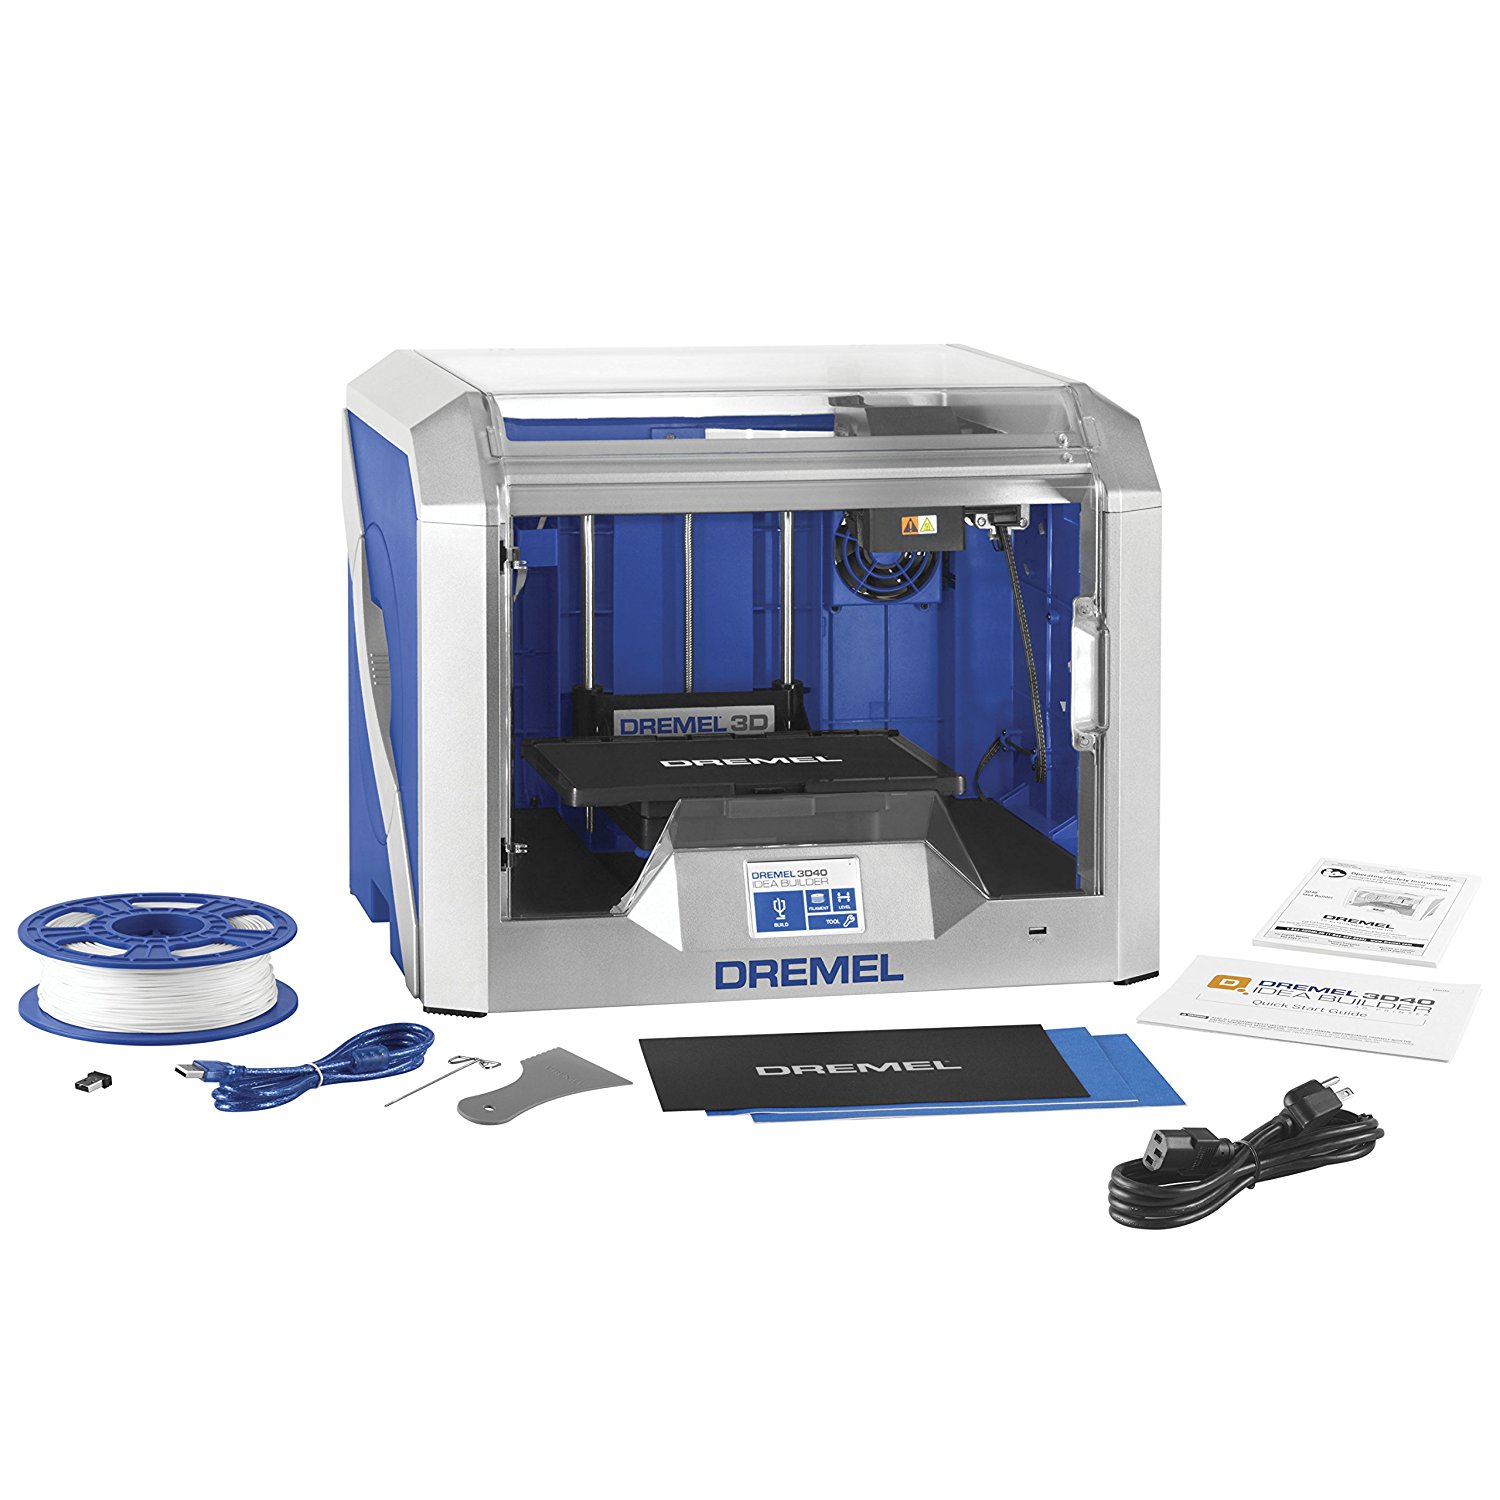 Dremel DigiLab 3D40 3D Printer, Most Reliable and Easie...